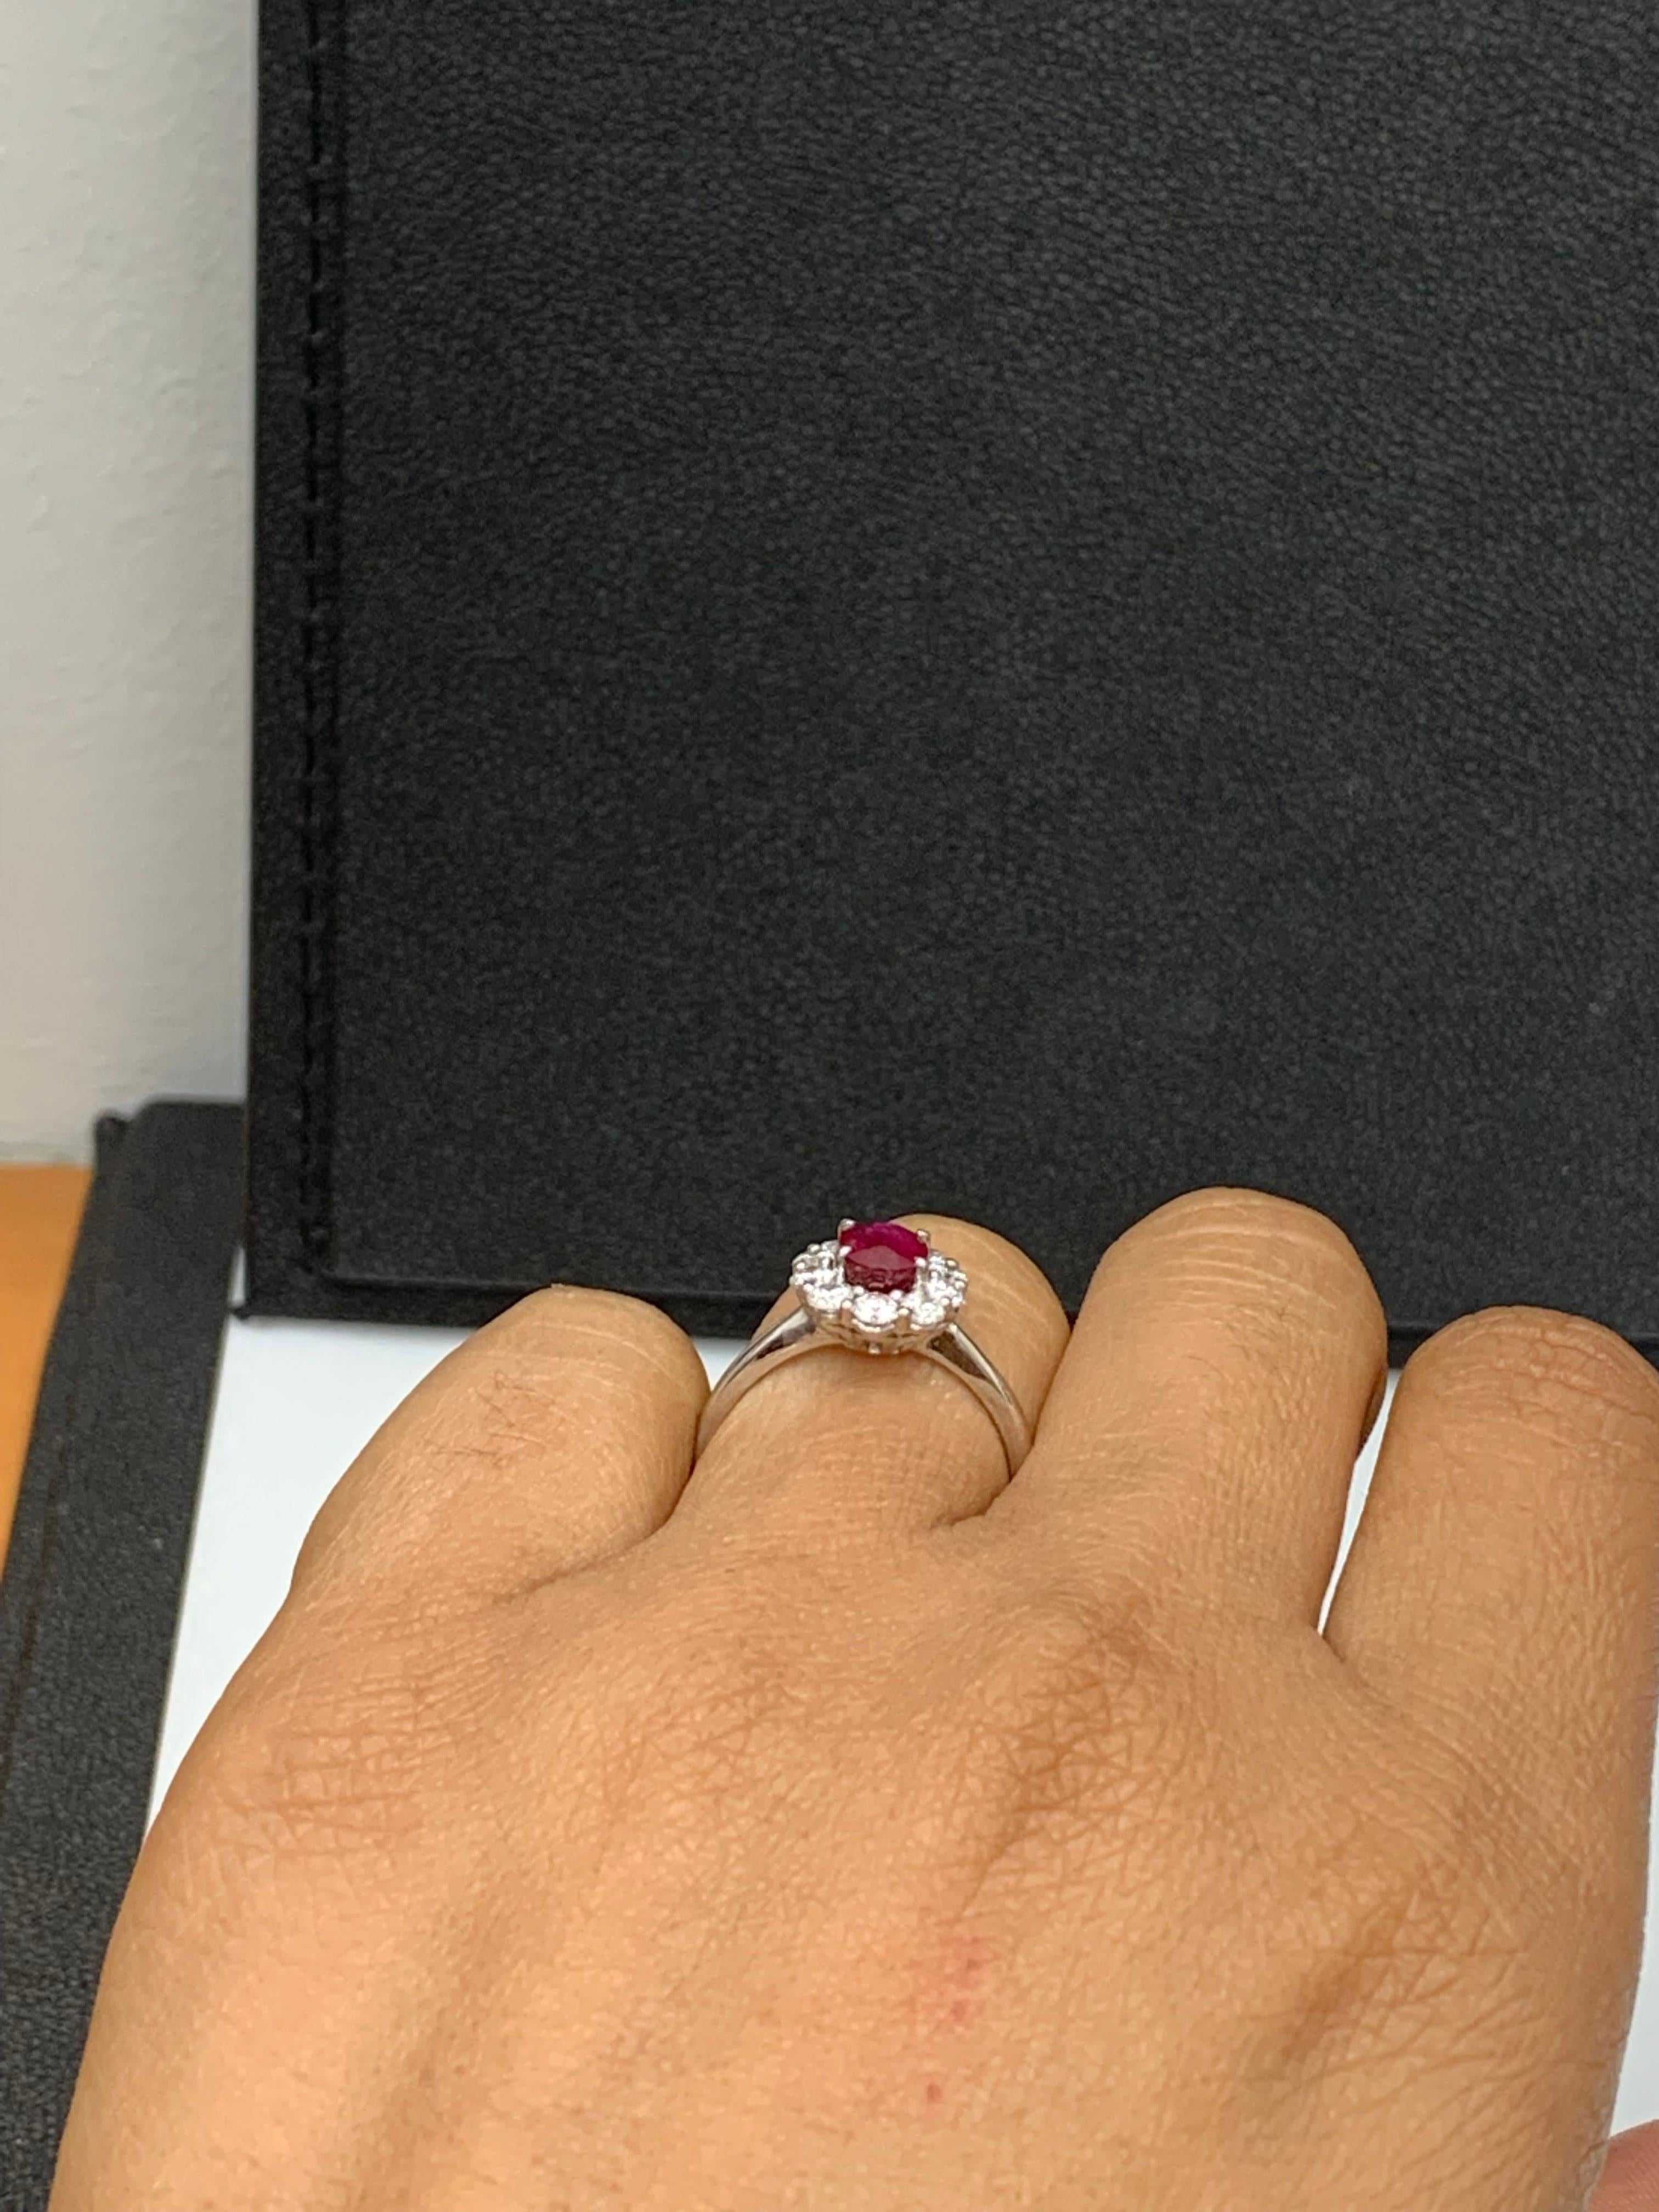 0.92 Carat Oval Cut Ruby and Diamond Ring in 18k White Gold For Sale 5